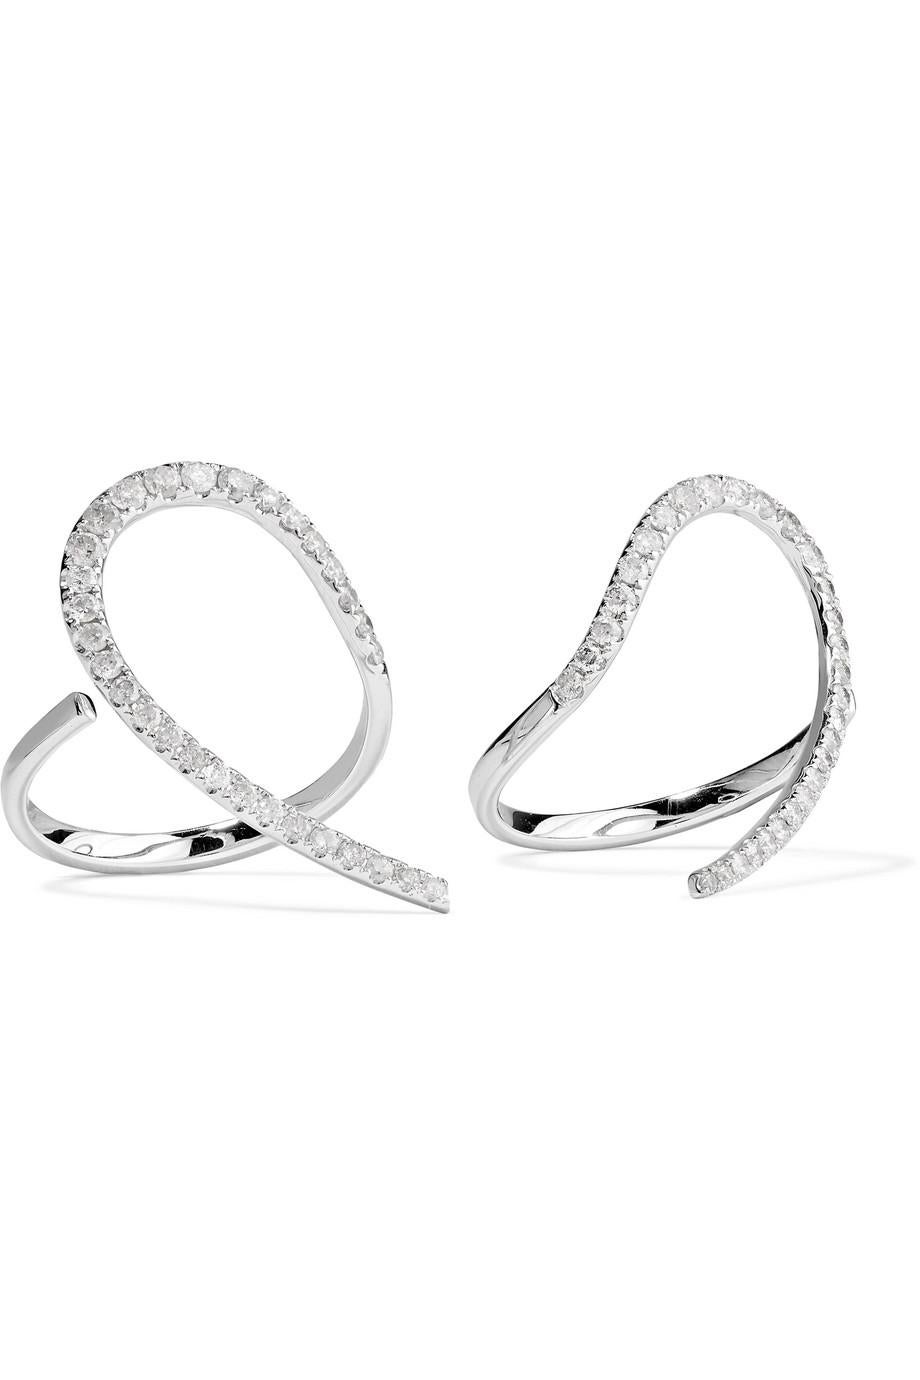 Women's Yvonne Leon's Double Ring Heart in 18 Carat White Gold and Diamonds